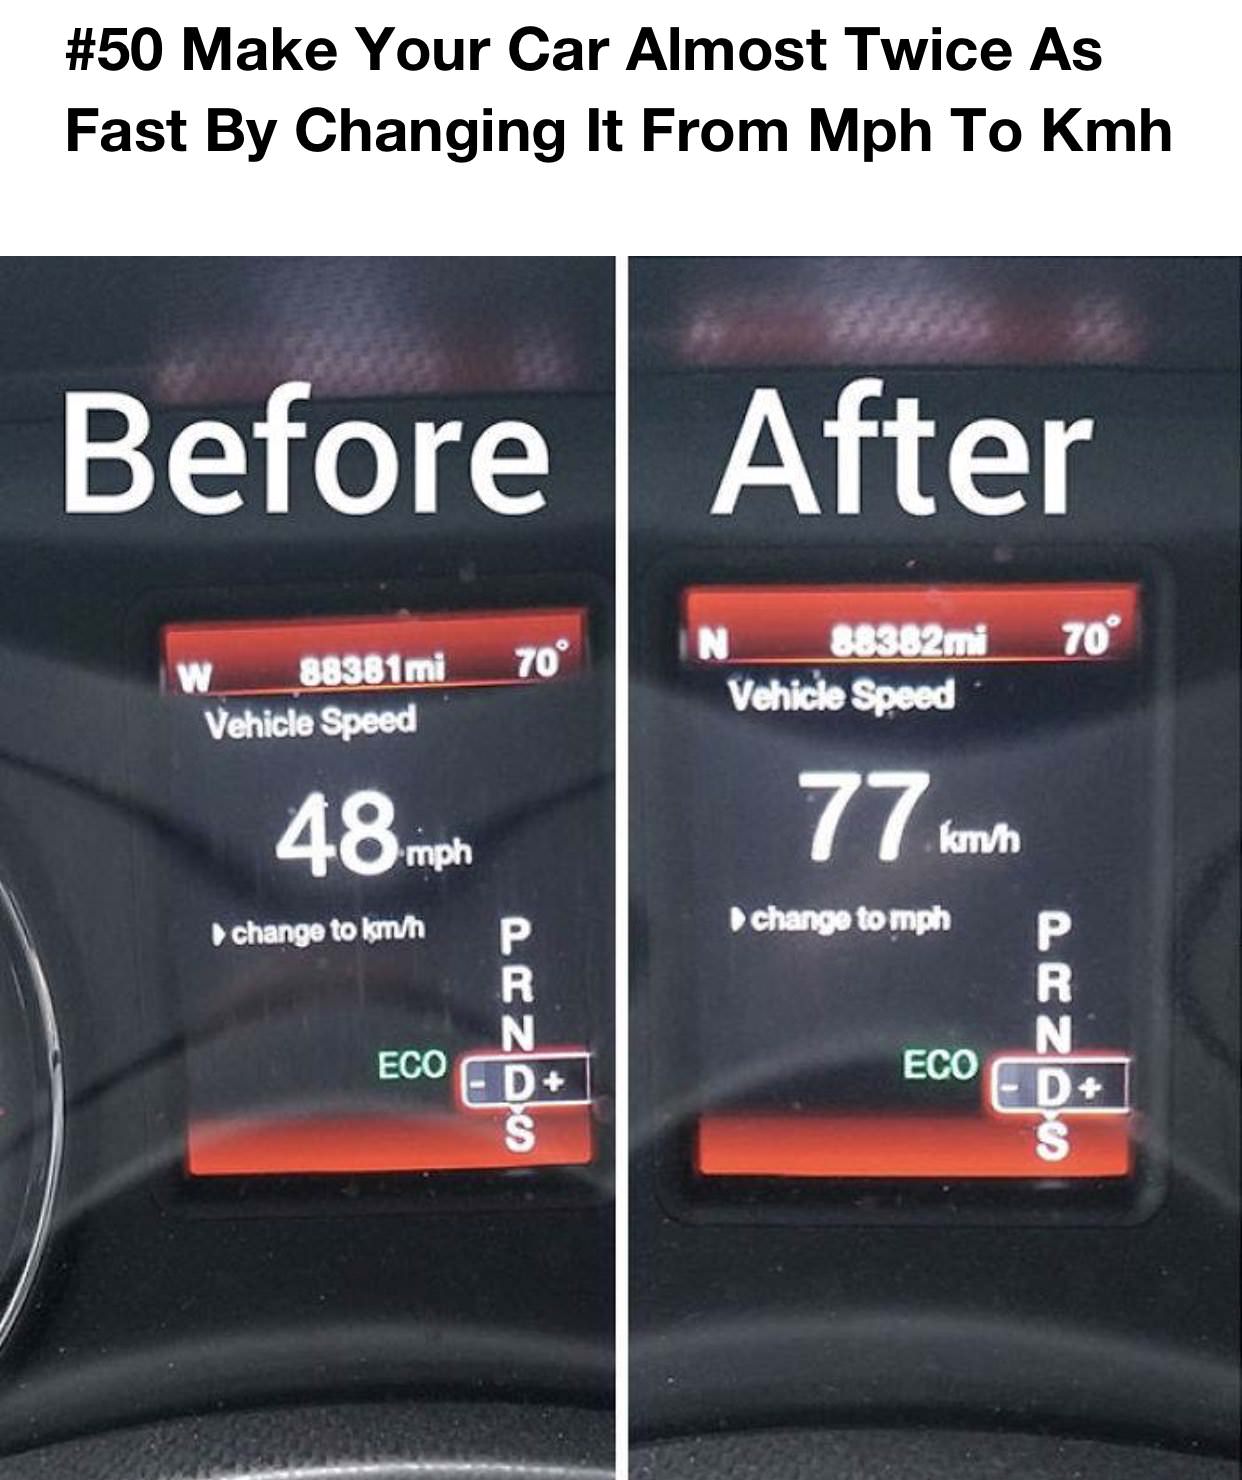 top life hacks - Make Your Car Almost Twice As Fast By Changing It From Mph To Kmh Before After In 70 70 88381mi Vehicle Speed 88382mi Vehicle Speed 48 mph kmh change to kmin change to mph P R R Ecod Eco